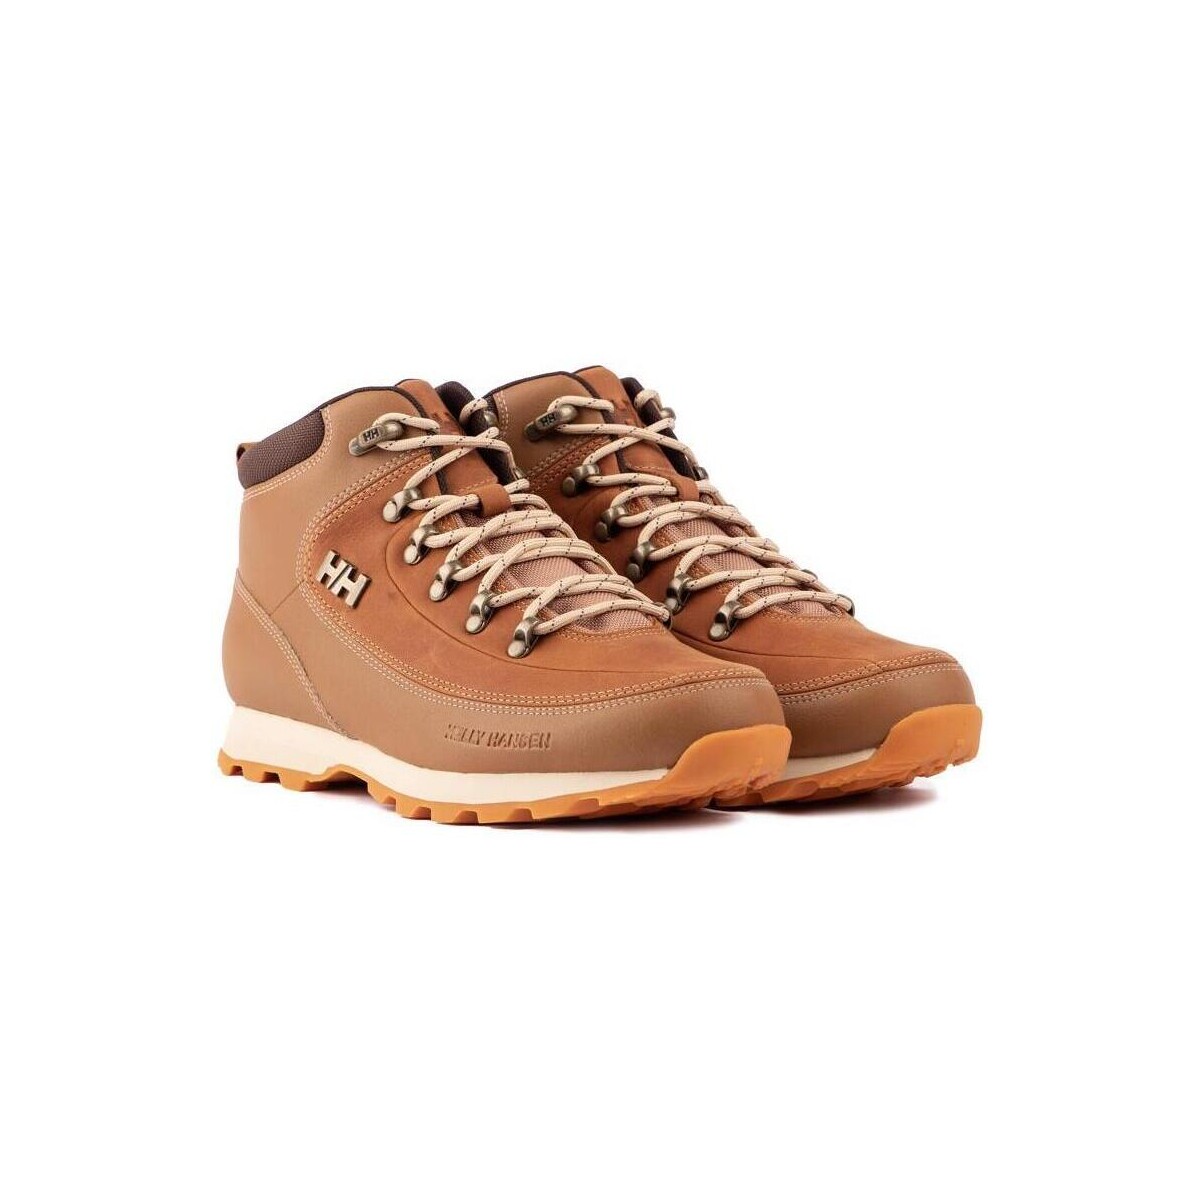 Helly Hansen Marron Forester Durable YkyS7JZ8